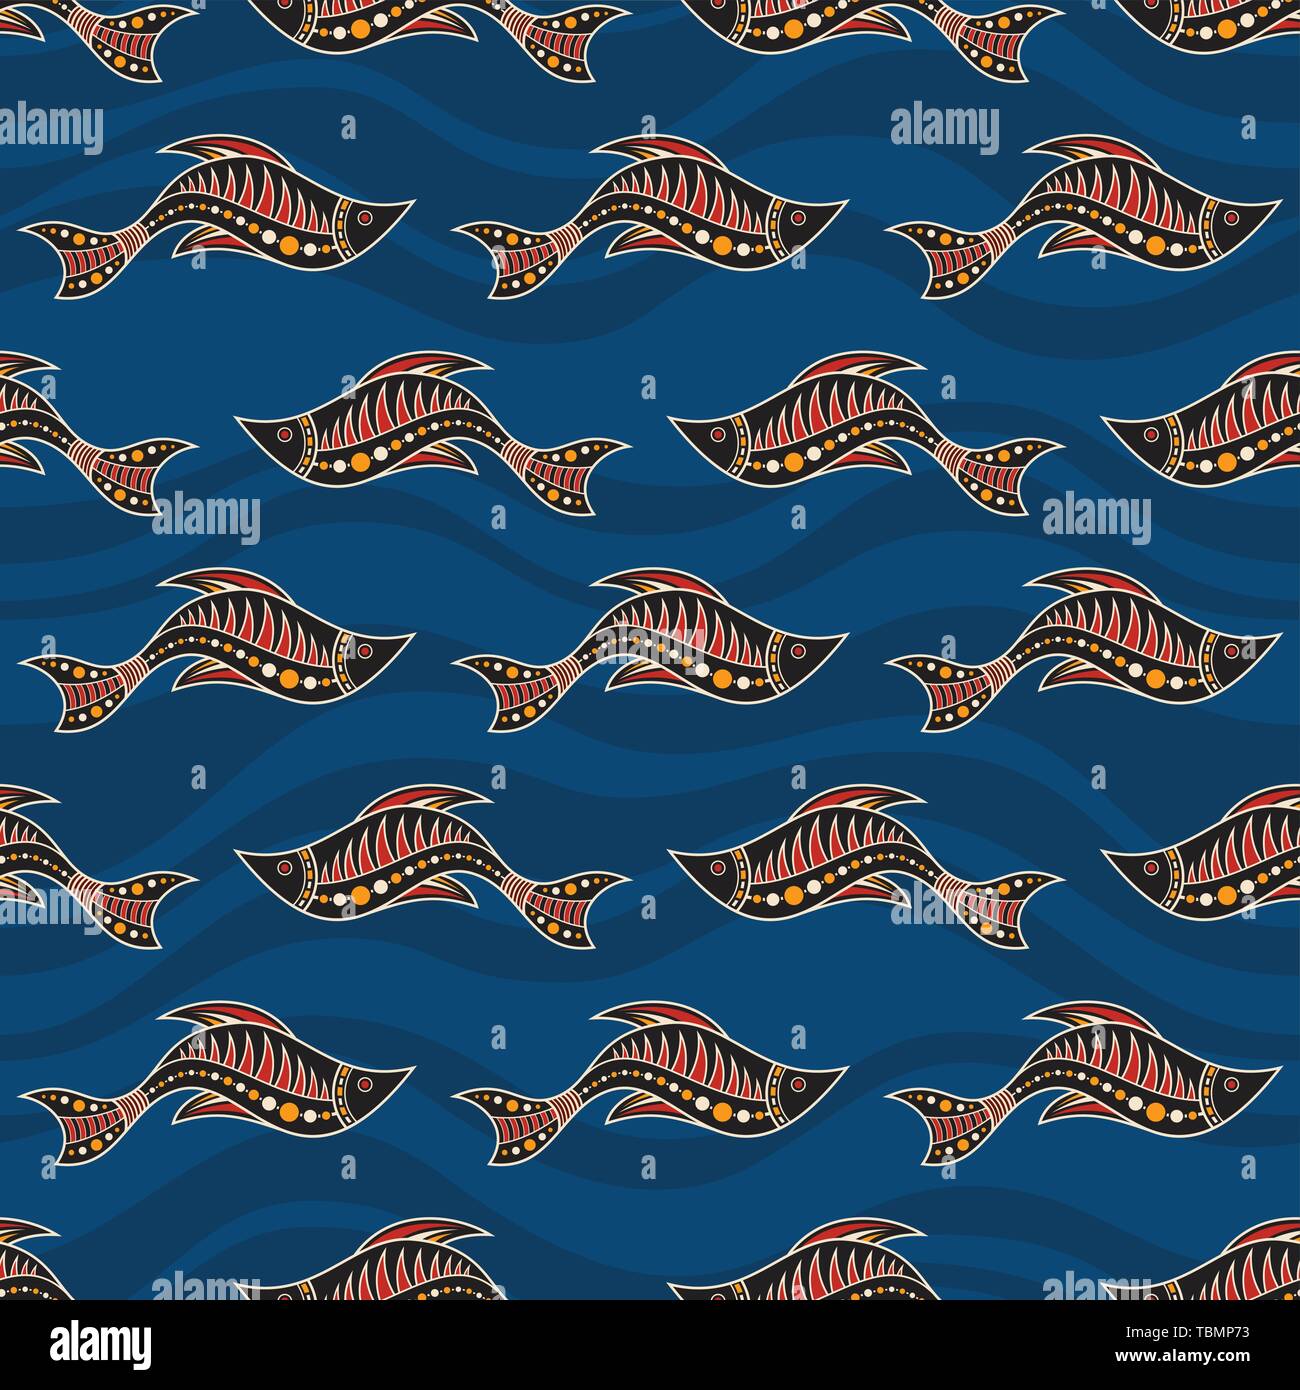 Seamless pattern of fishes with abstract waves on background. Australian art. Aboriginal painting style. Vector color background. Stock Vector